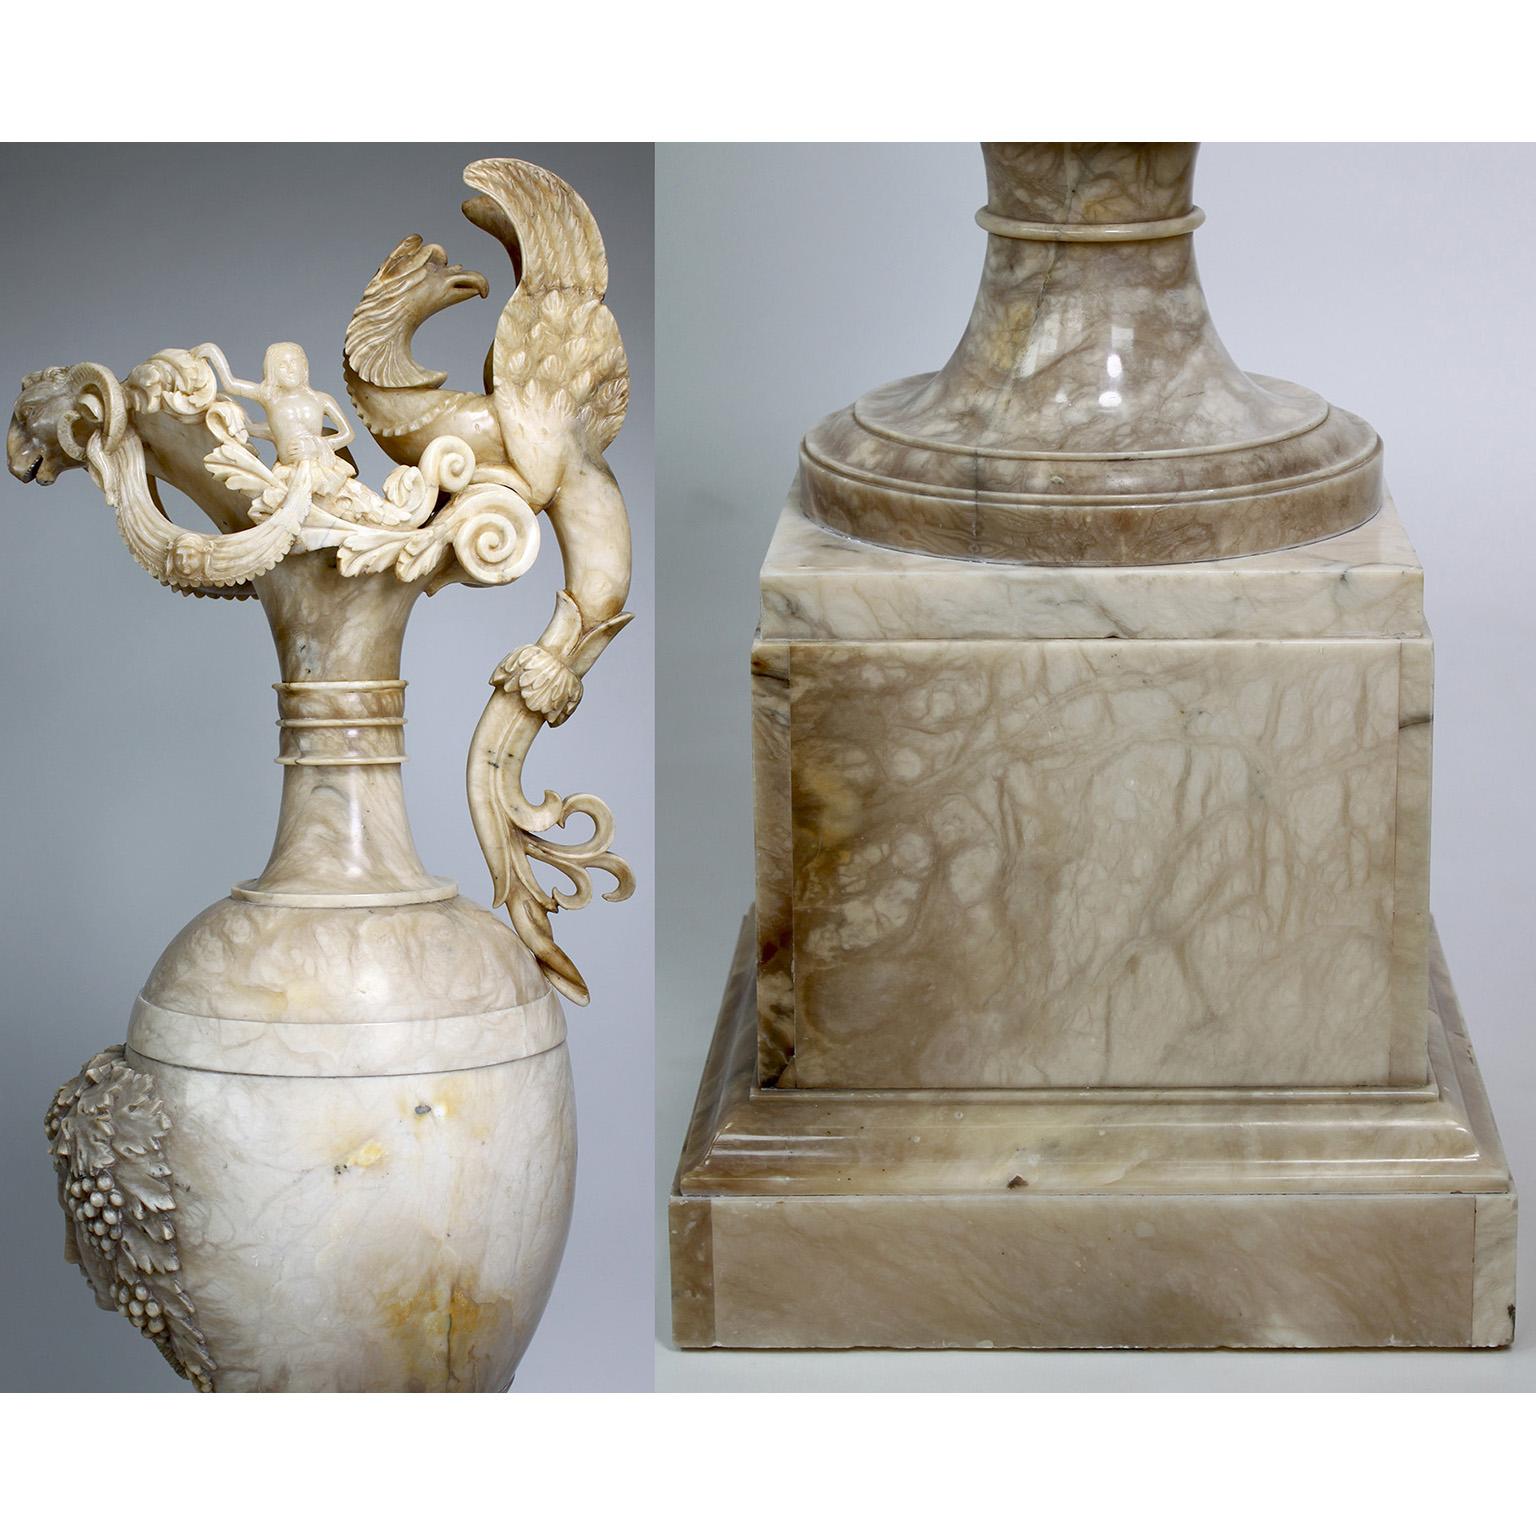 Monumental Italian 19th Century Renaissance Revival Style Carved Alabaster Urn  For Sale 11